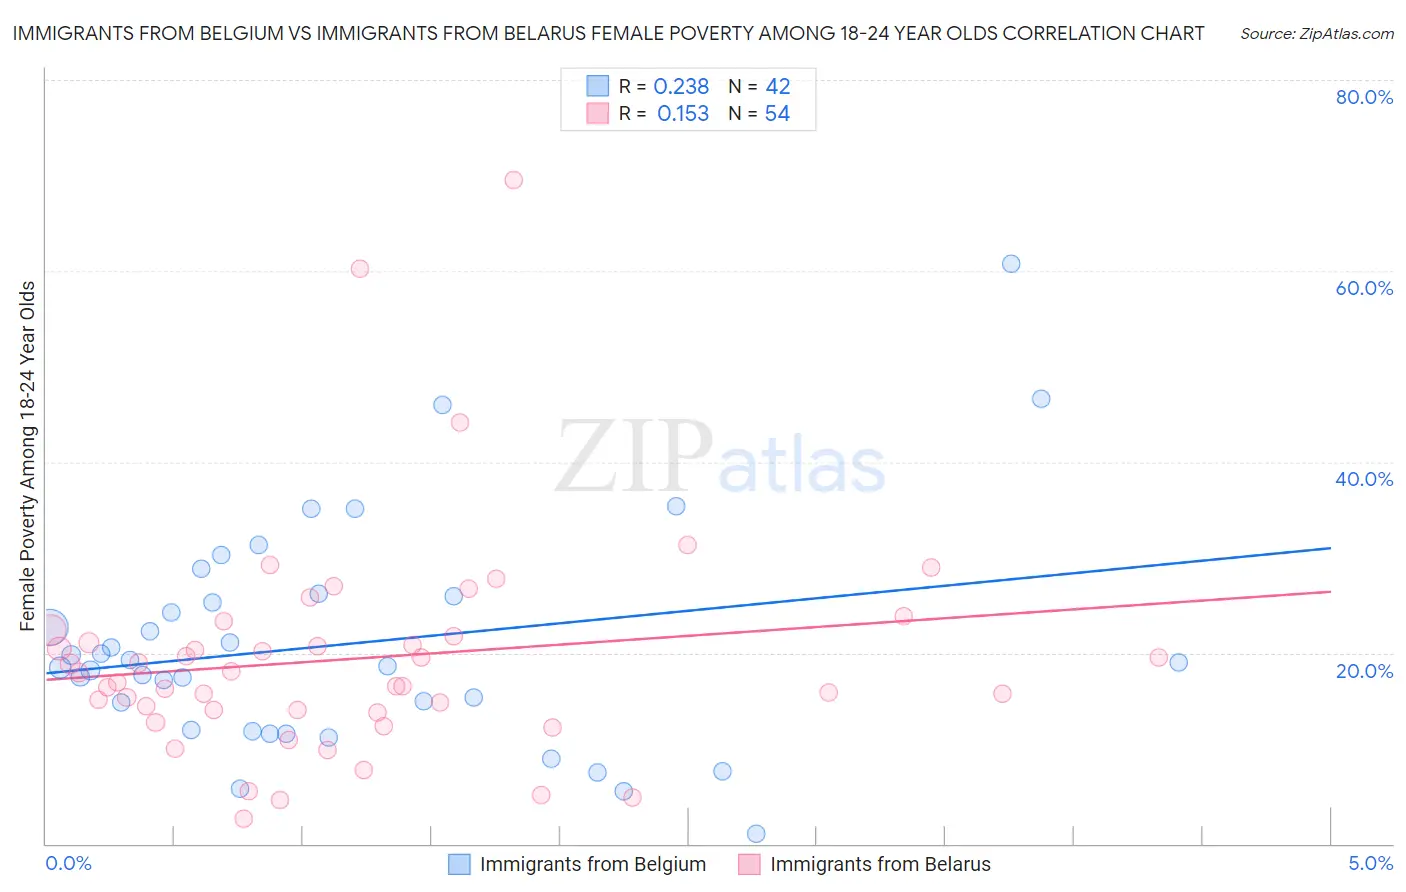 Immigrants from Belgium vs Immigrants from Belarus Female Poverty Among 18-24 Year Olds